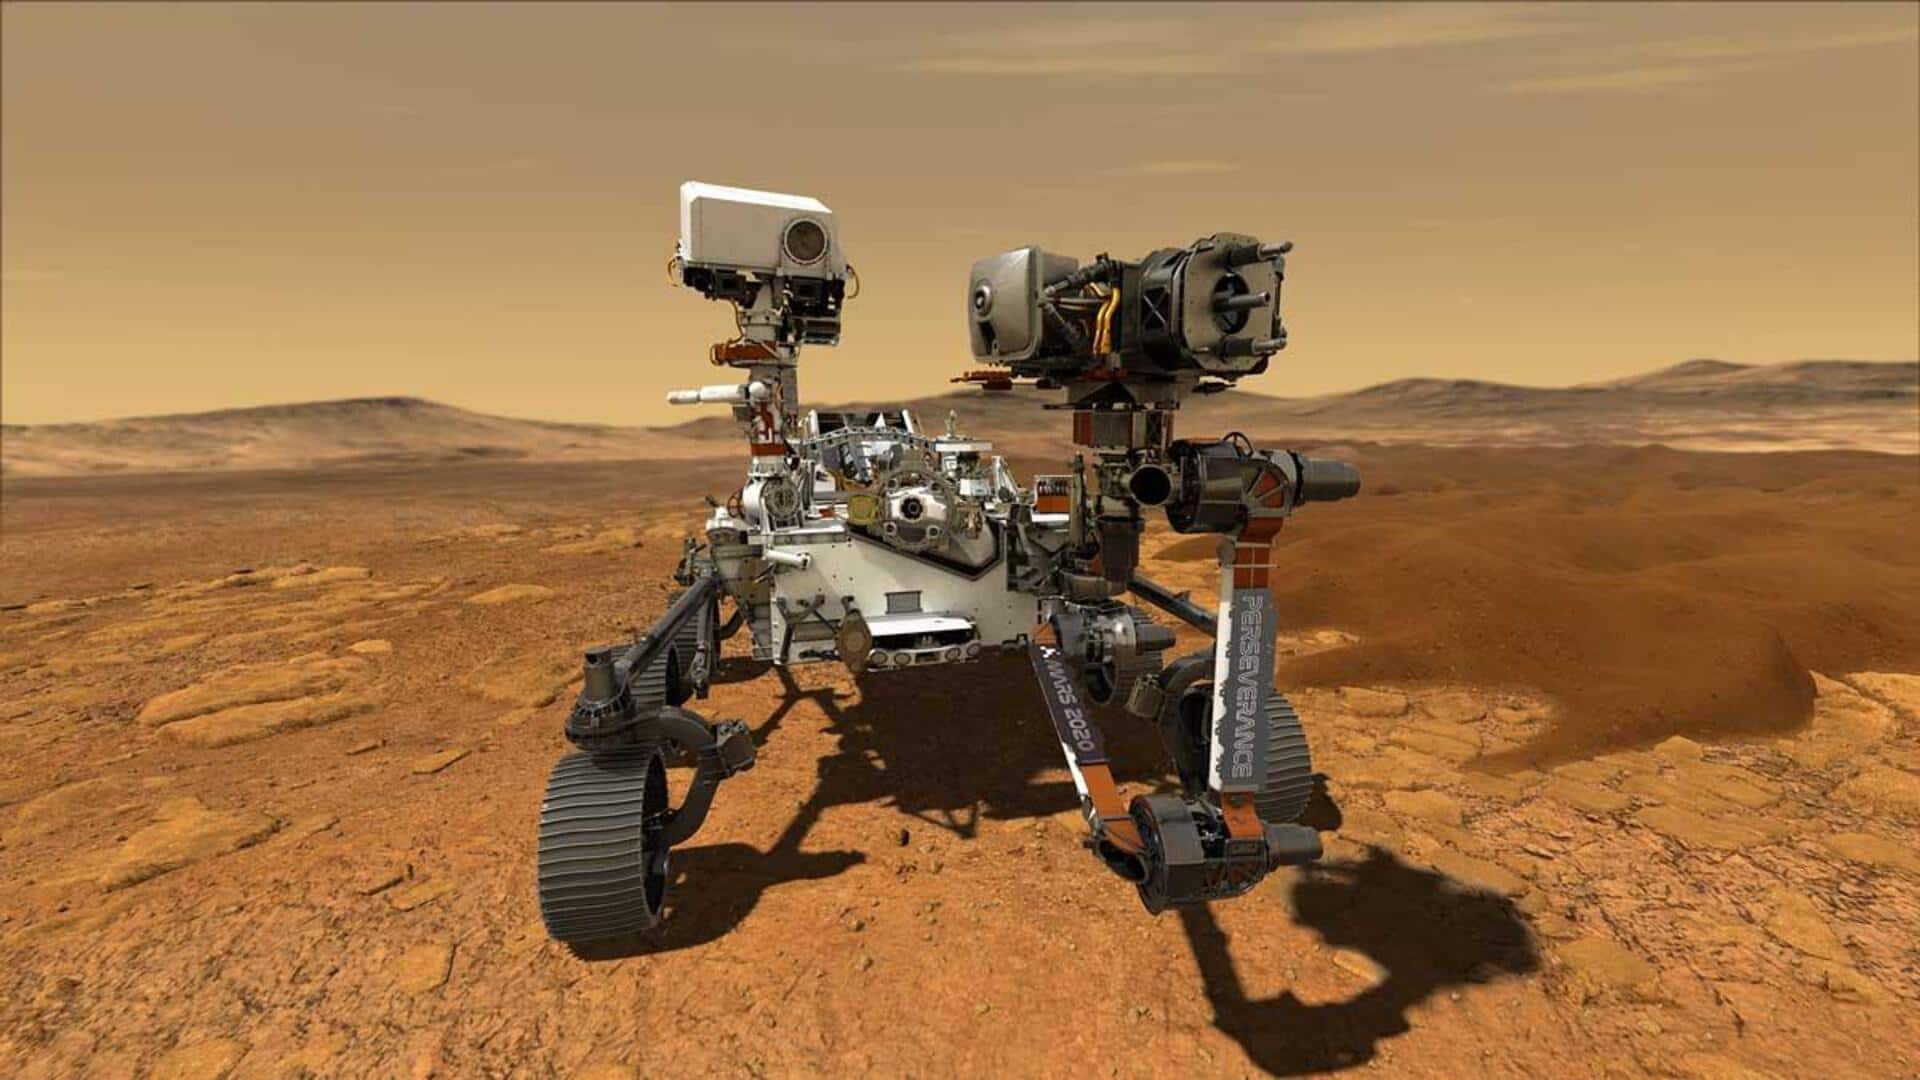 Mars Sample Return mission faces uncertainty due to NASA layoffs